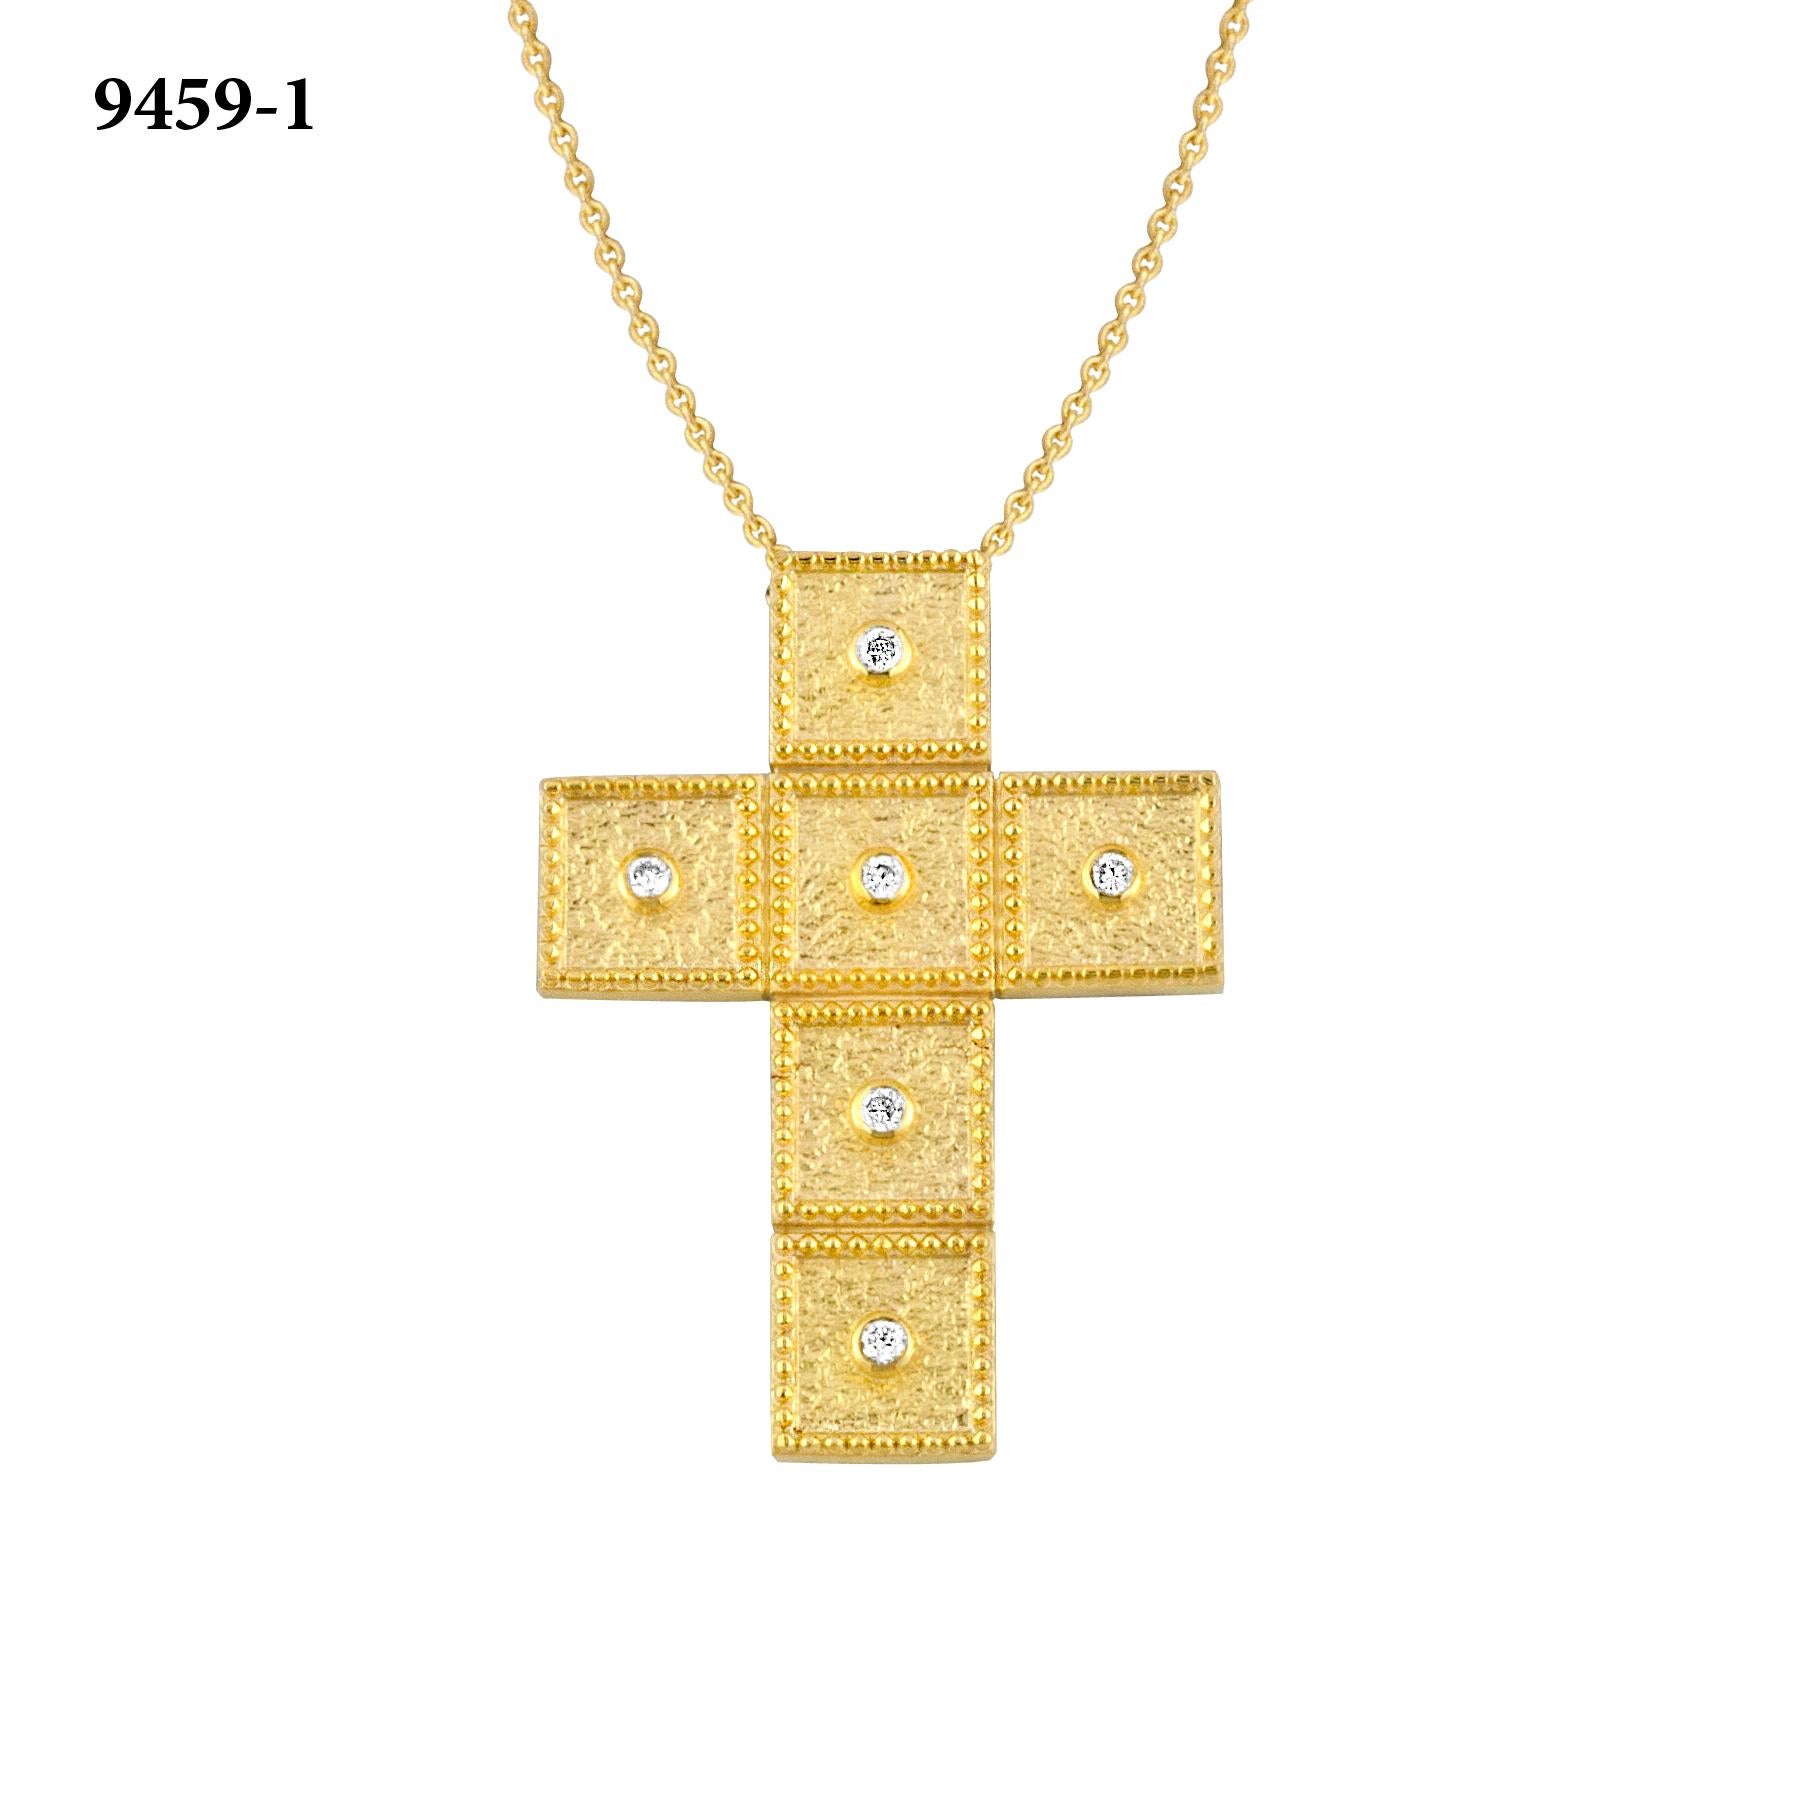 S.Georgios Cross is all handmade from solid 18 Karat Yellow Gold and is microscopically decorated with granulation work all the way around. The background of the gorgeous Cross has a unique velvet look and features 6 Brilliant cut Diamonds total